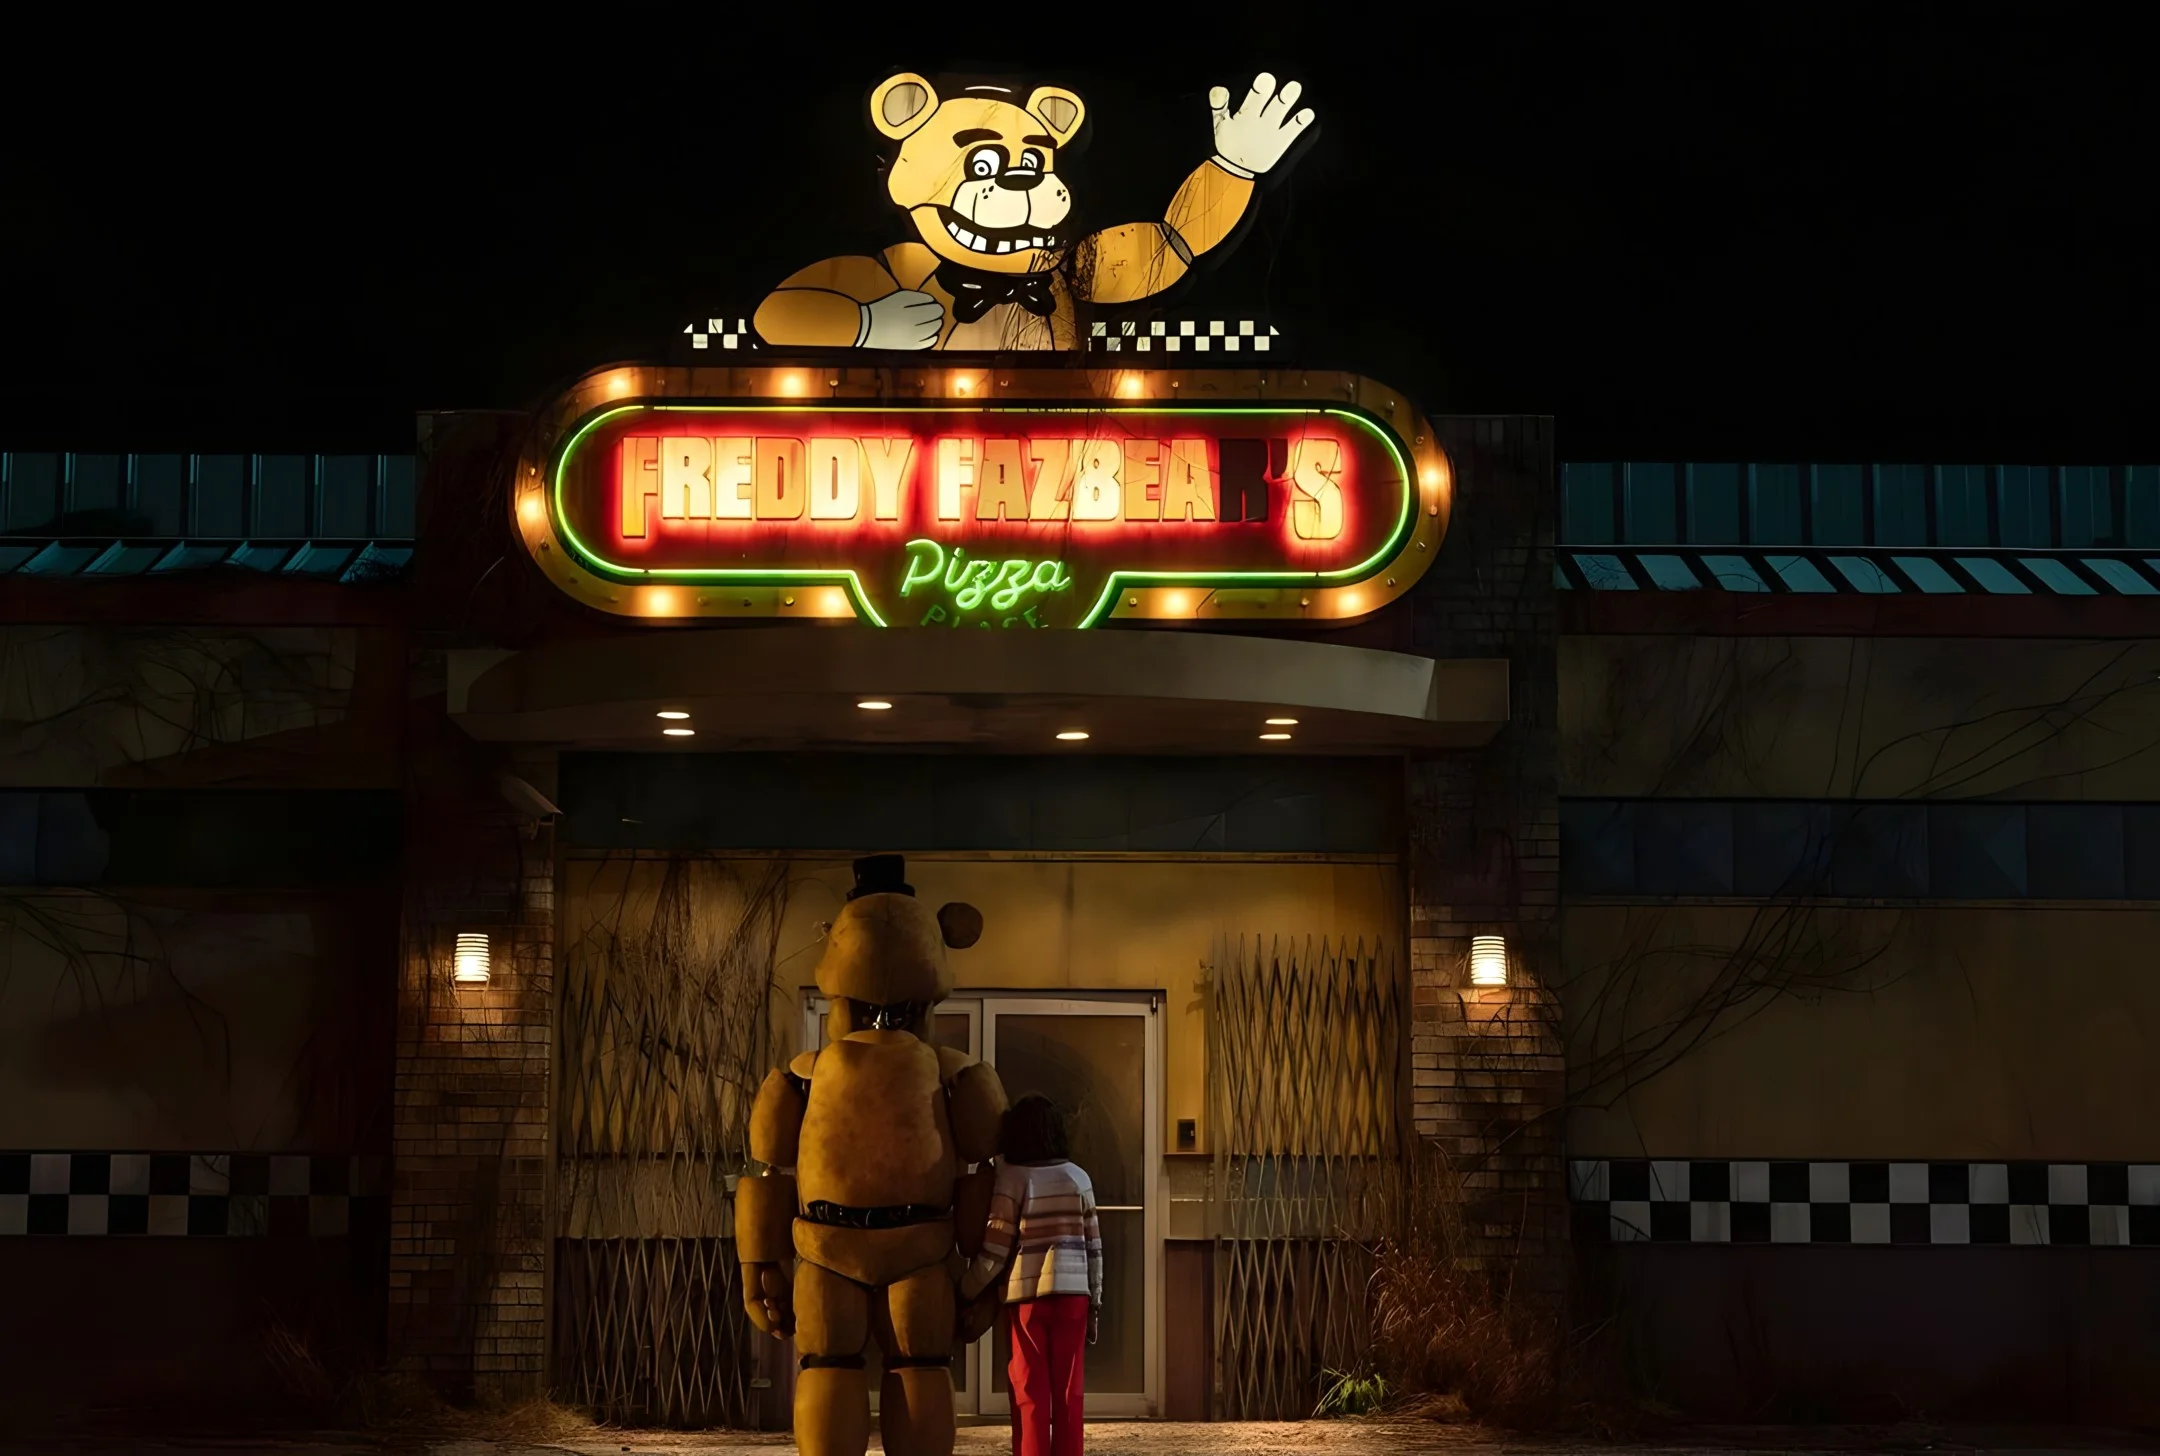 The film adaptation of Five Nights at Freddy's became the highest-grossing horror film of 2023